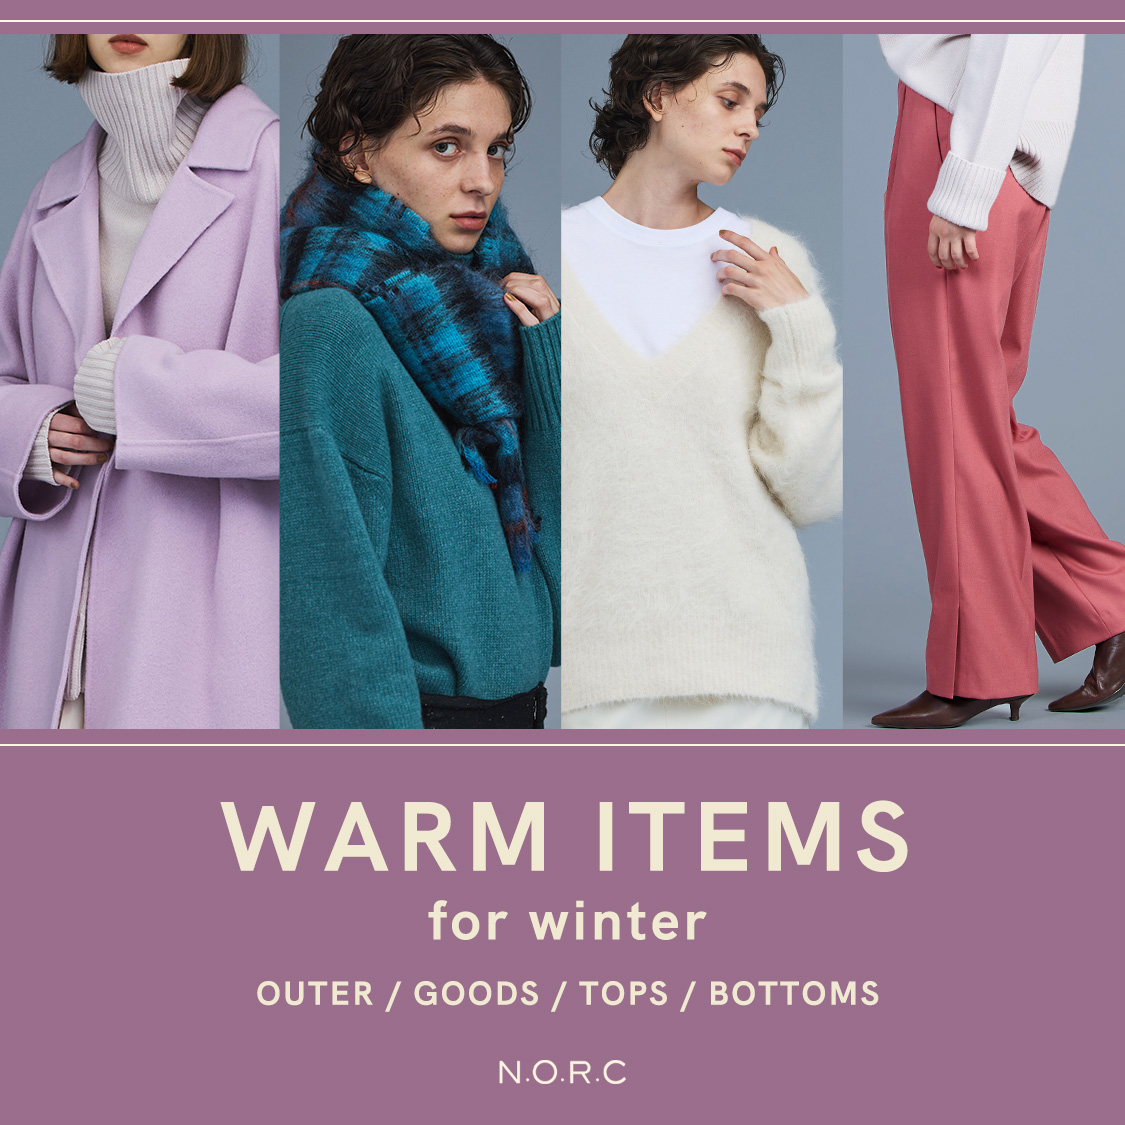 WARM ITEMS for winter